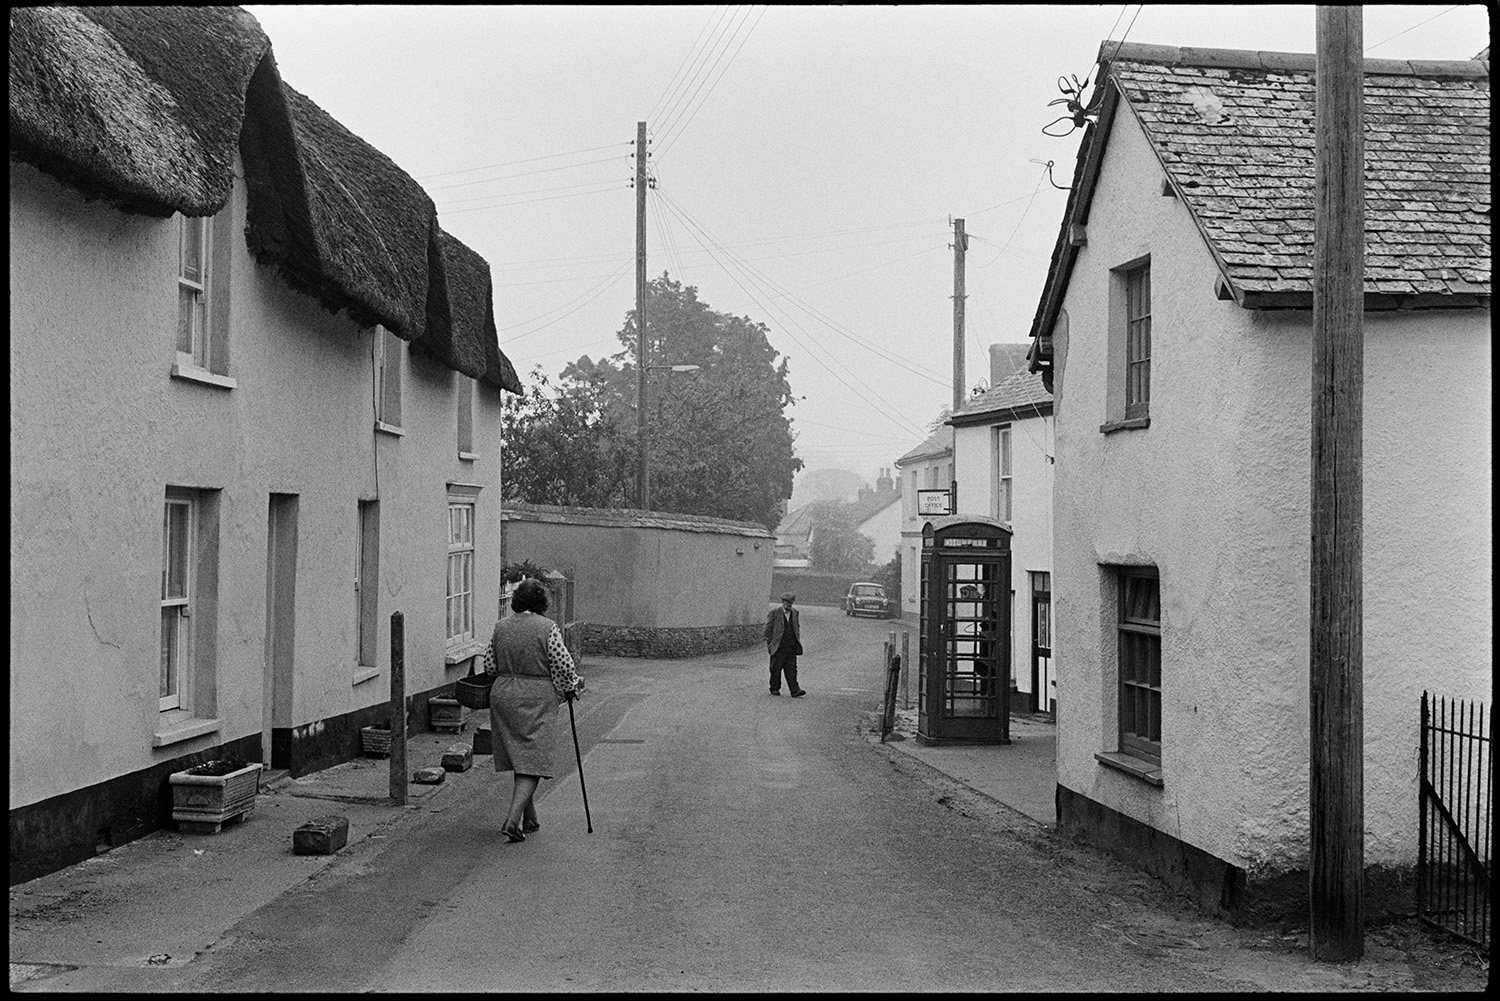 Village street, car, man posting letter, dog, telephone kiosk. 
[A man and a woman using a walking stick walking past thatched cottages in Fore Street, Dolton. A telephone box in on the other side of the street.]